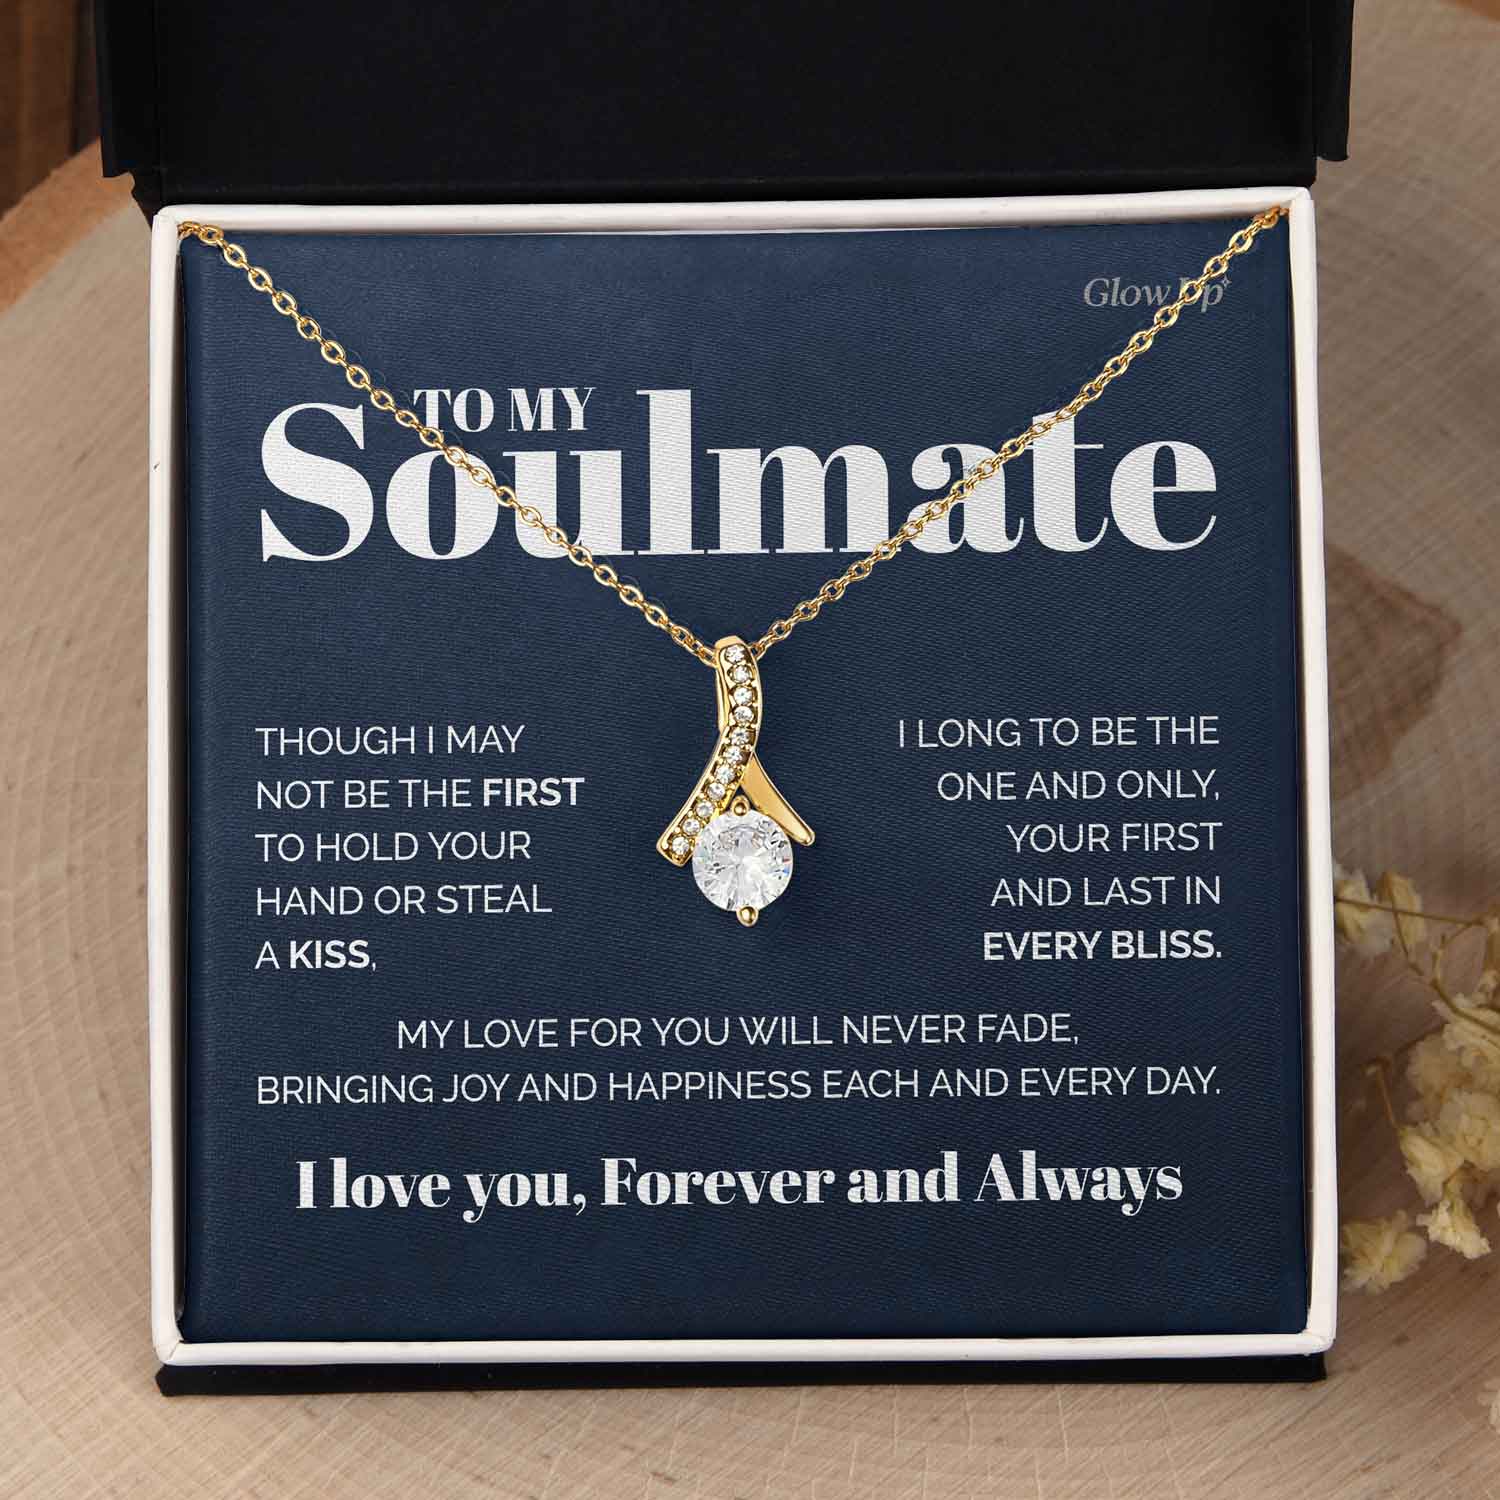 ShineOn Fulfillment Jewelry 18K Yellow Gold Finish / Two-Toned Box To My Soulmate - My love will never fade - Ribbon necklace